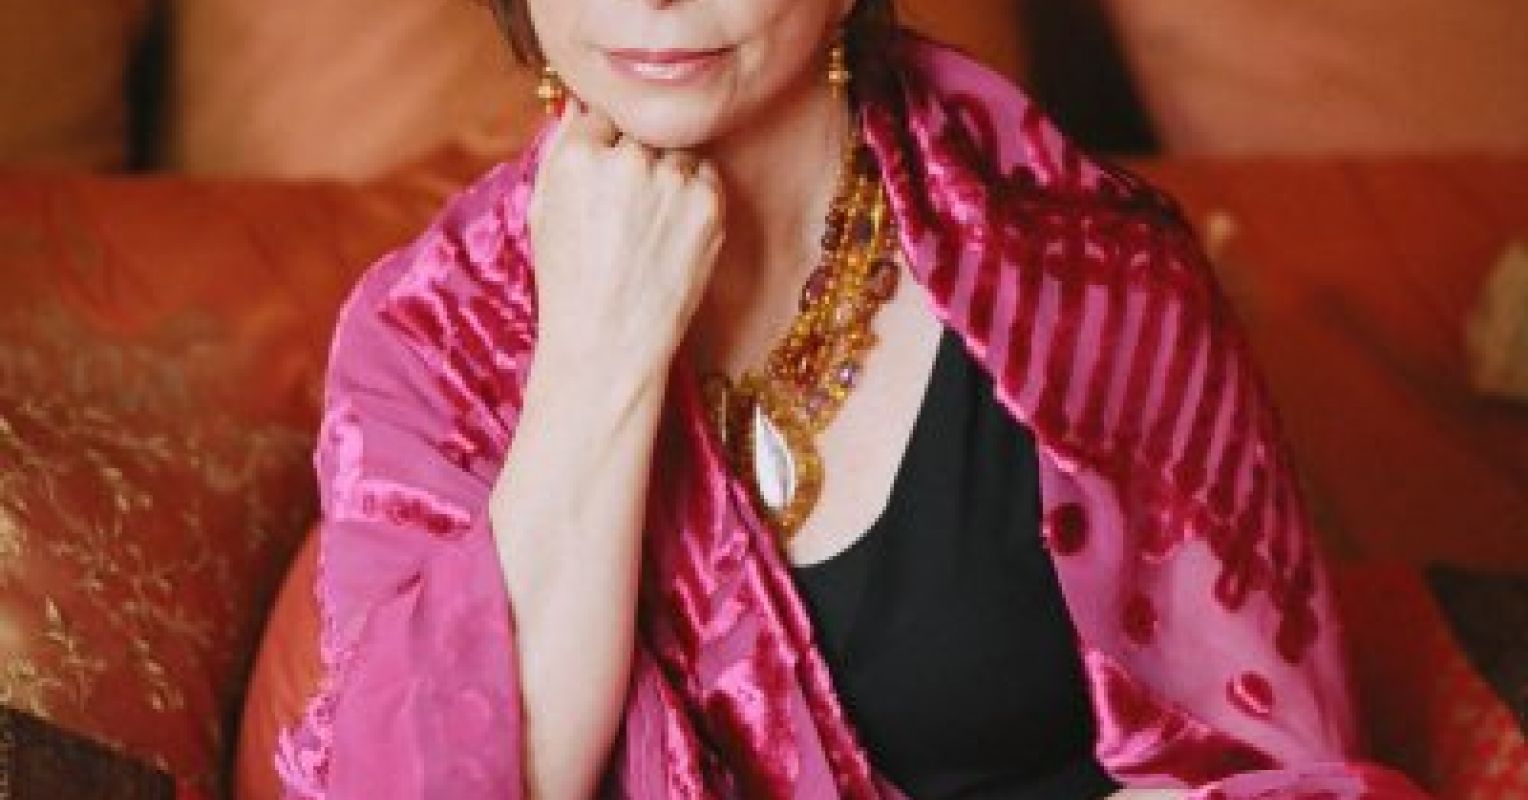 isabel allende book about her daughter